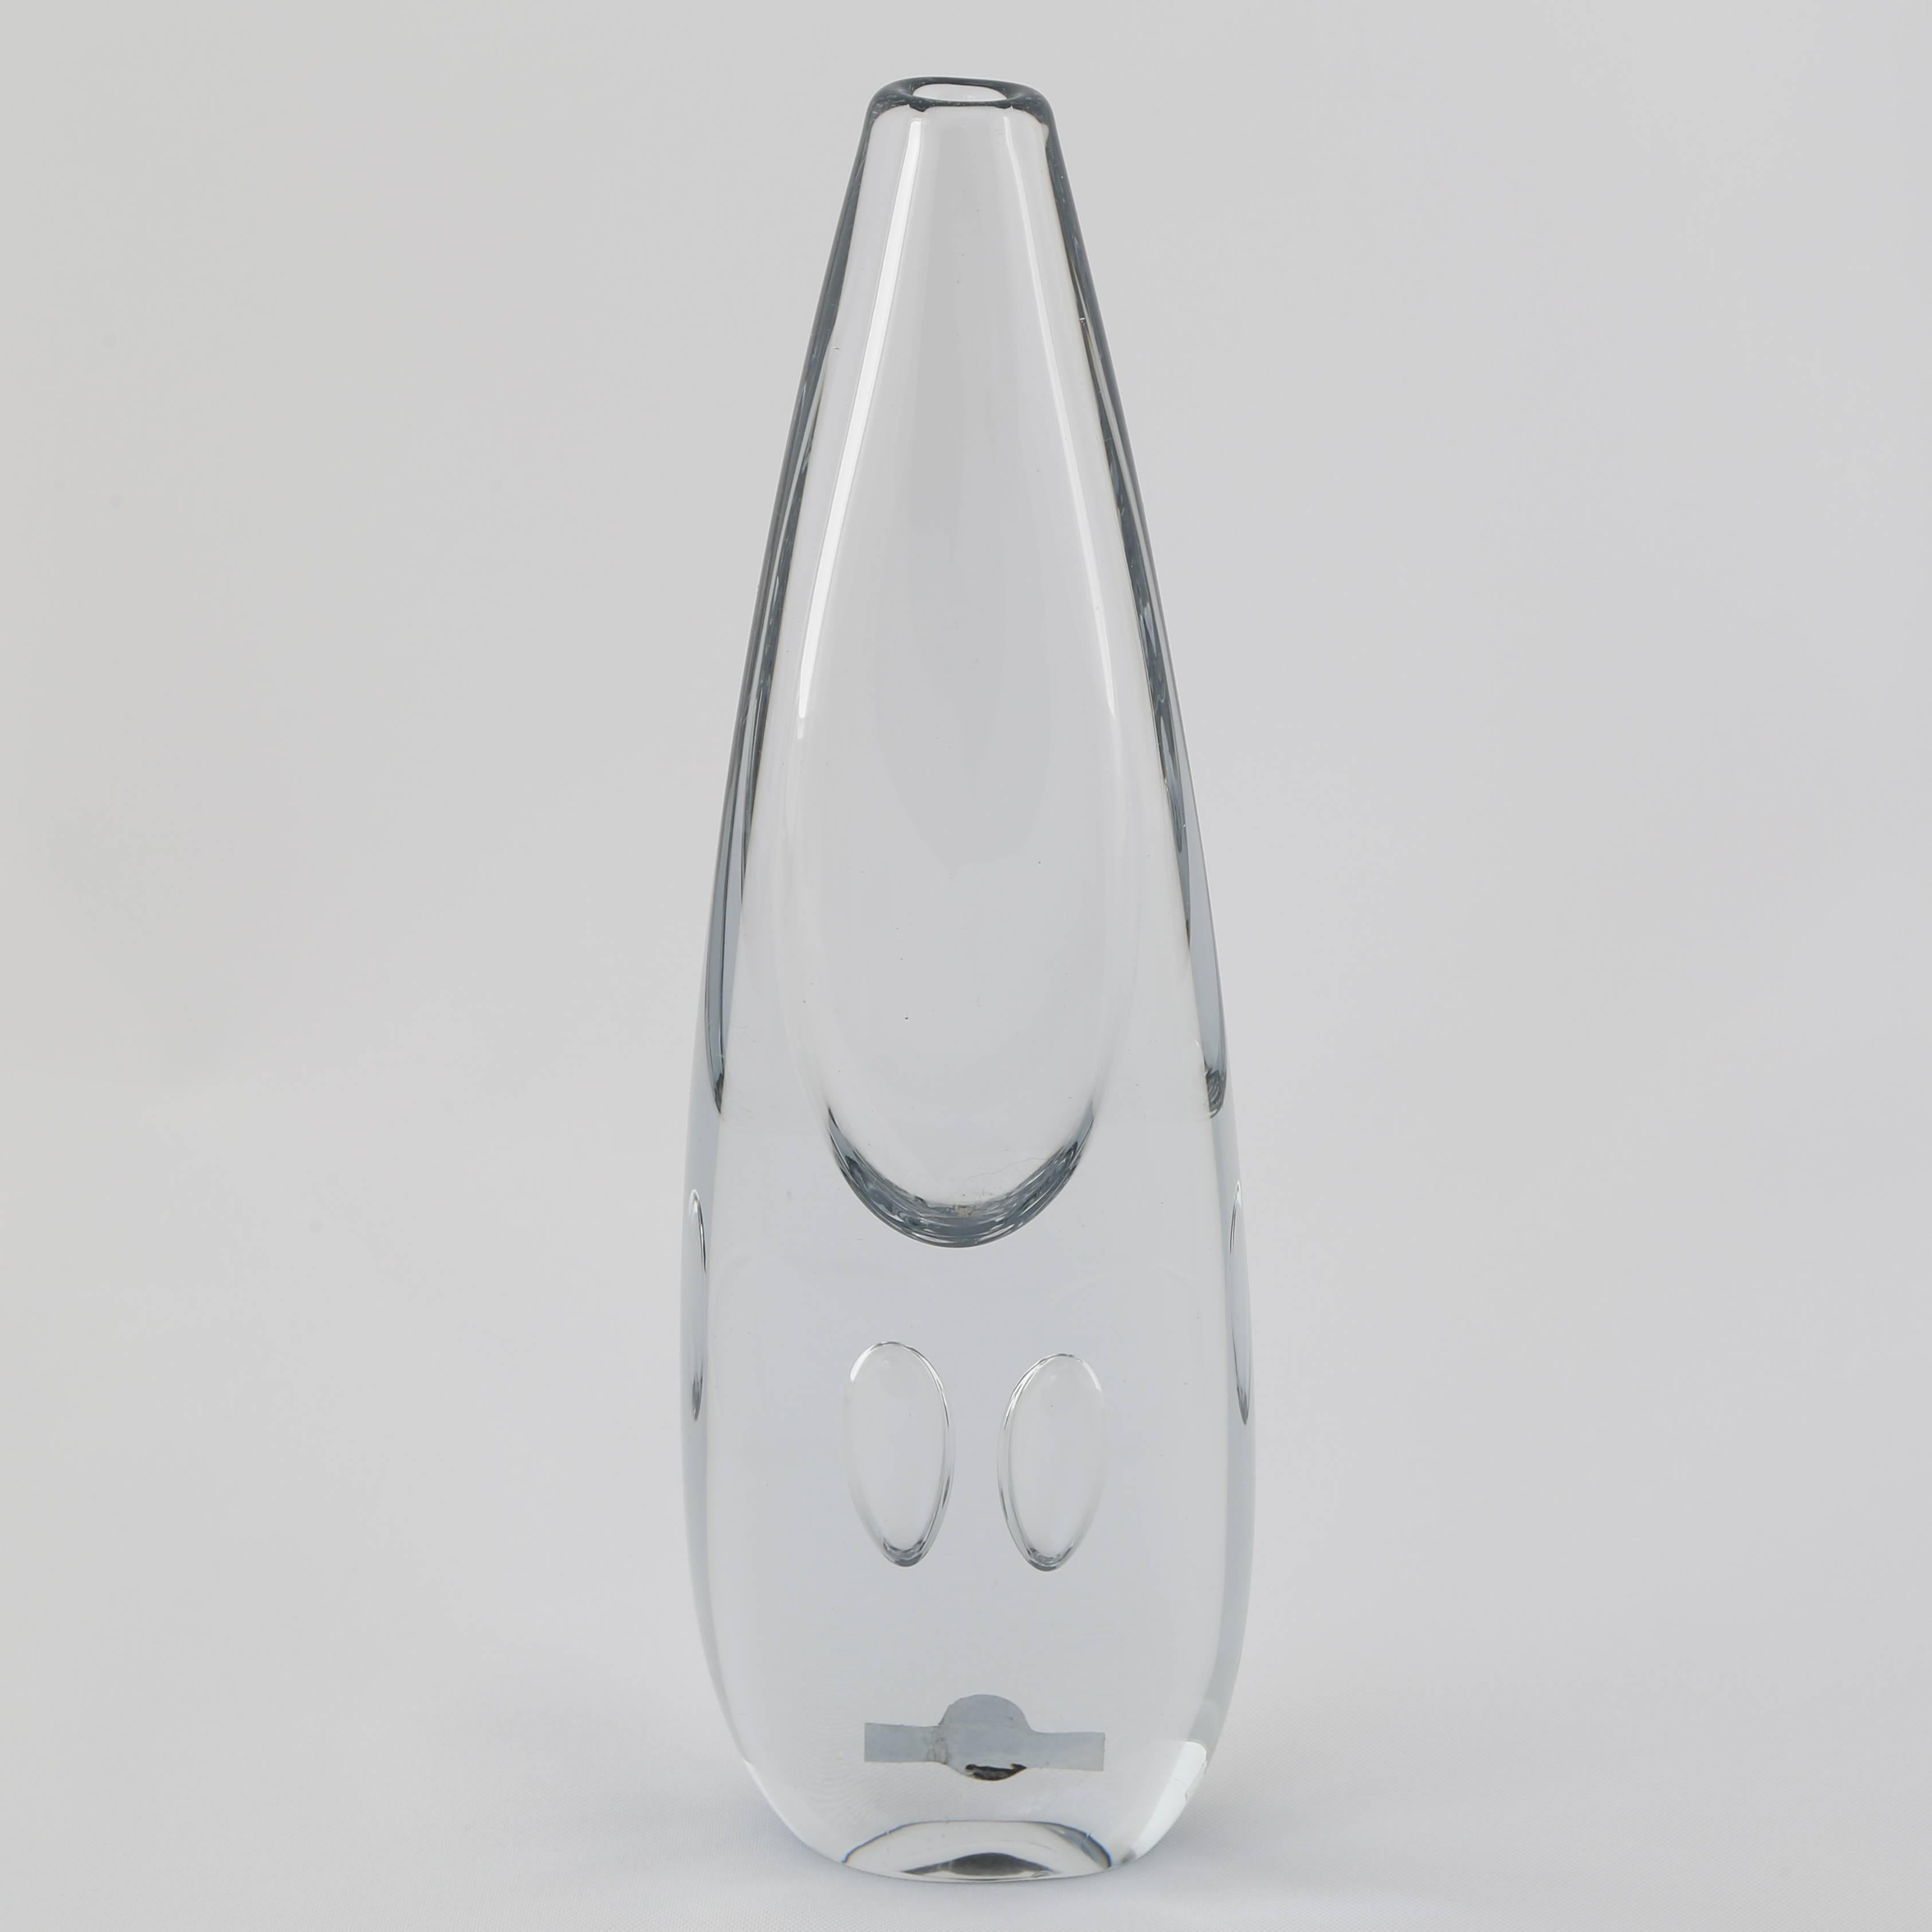 A lovely, hand-blown, teardrop vase with two suspended bubbles in Strombergshyttan's signature blue-silver glass. Sweden, circa 1950s. Strombergshyttan label. 

Lindfors Glassworks was founded in 1876 and changed its name to Strombergshyttan in